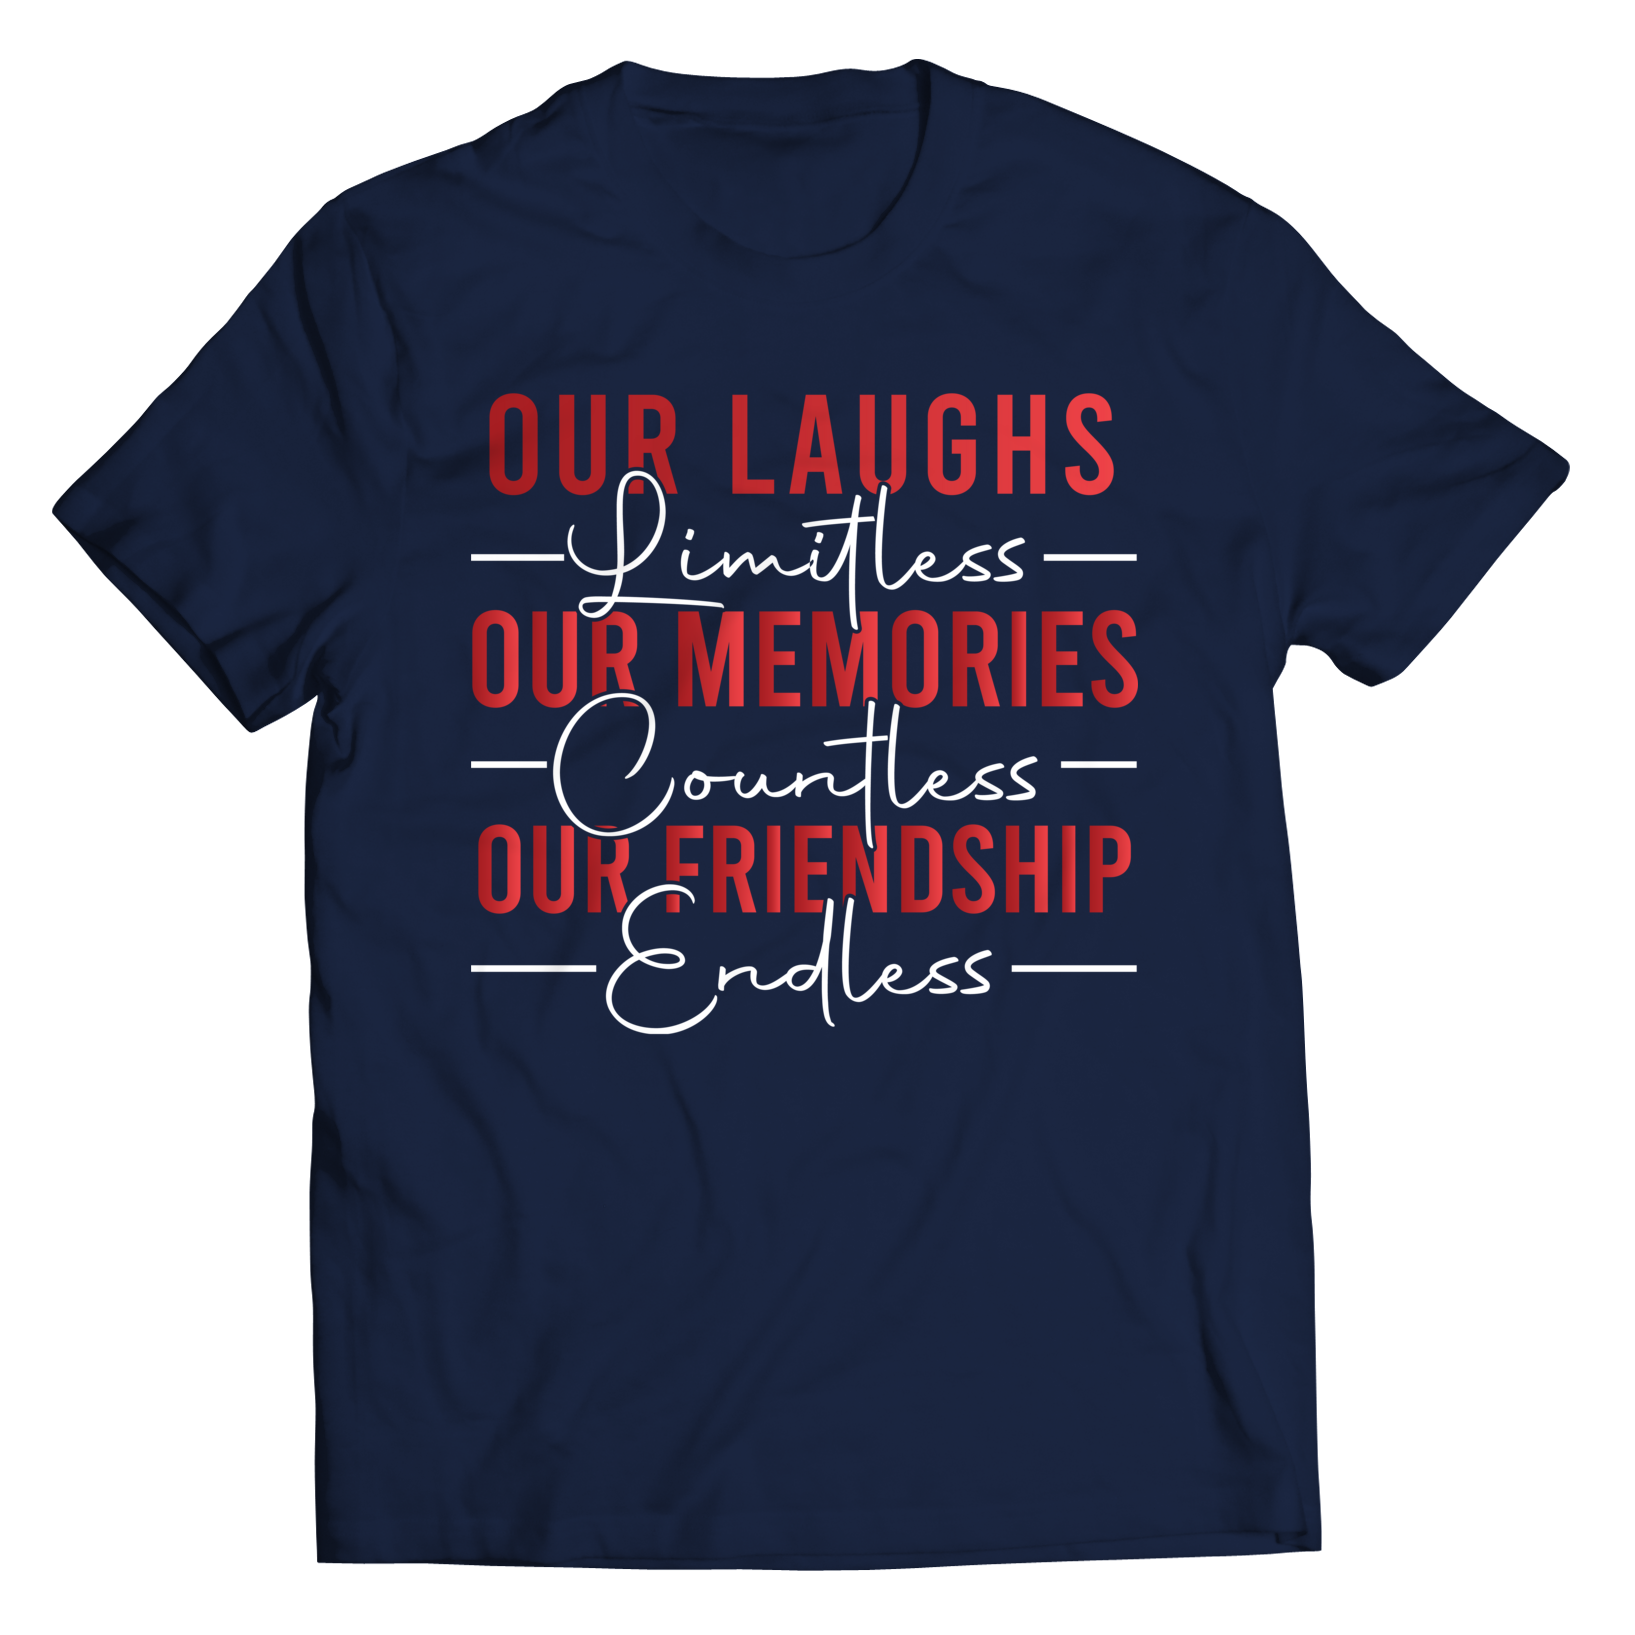 Our Laughs Are Limitless™